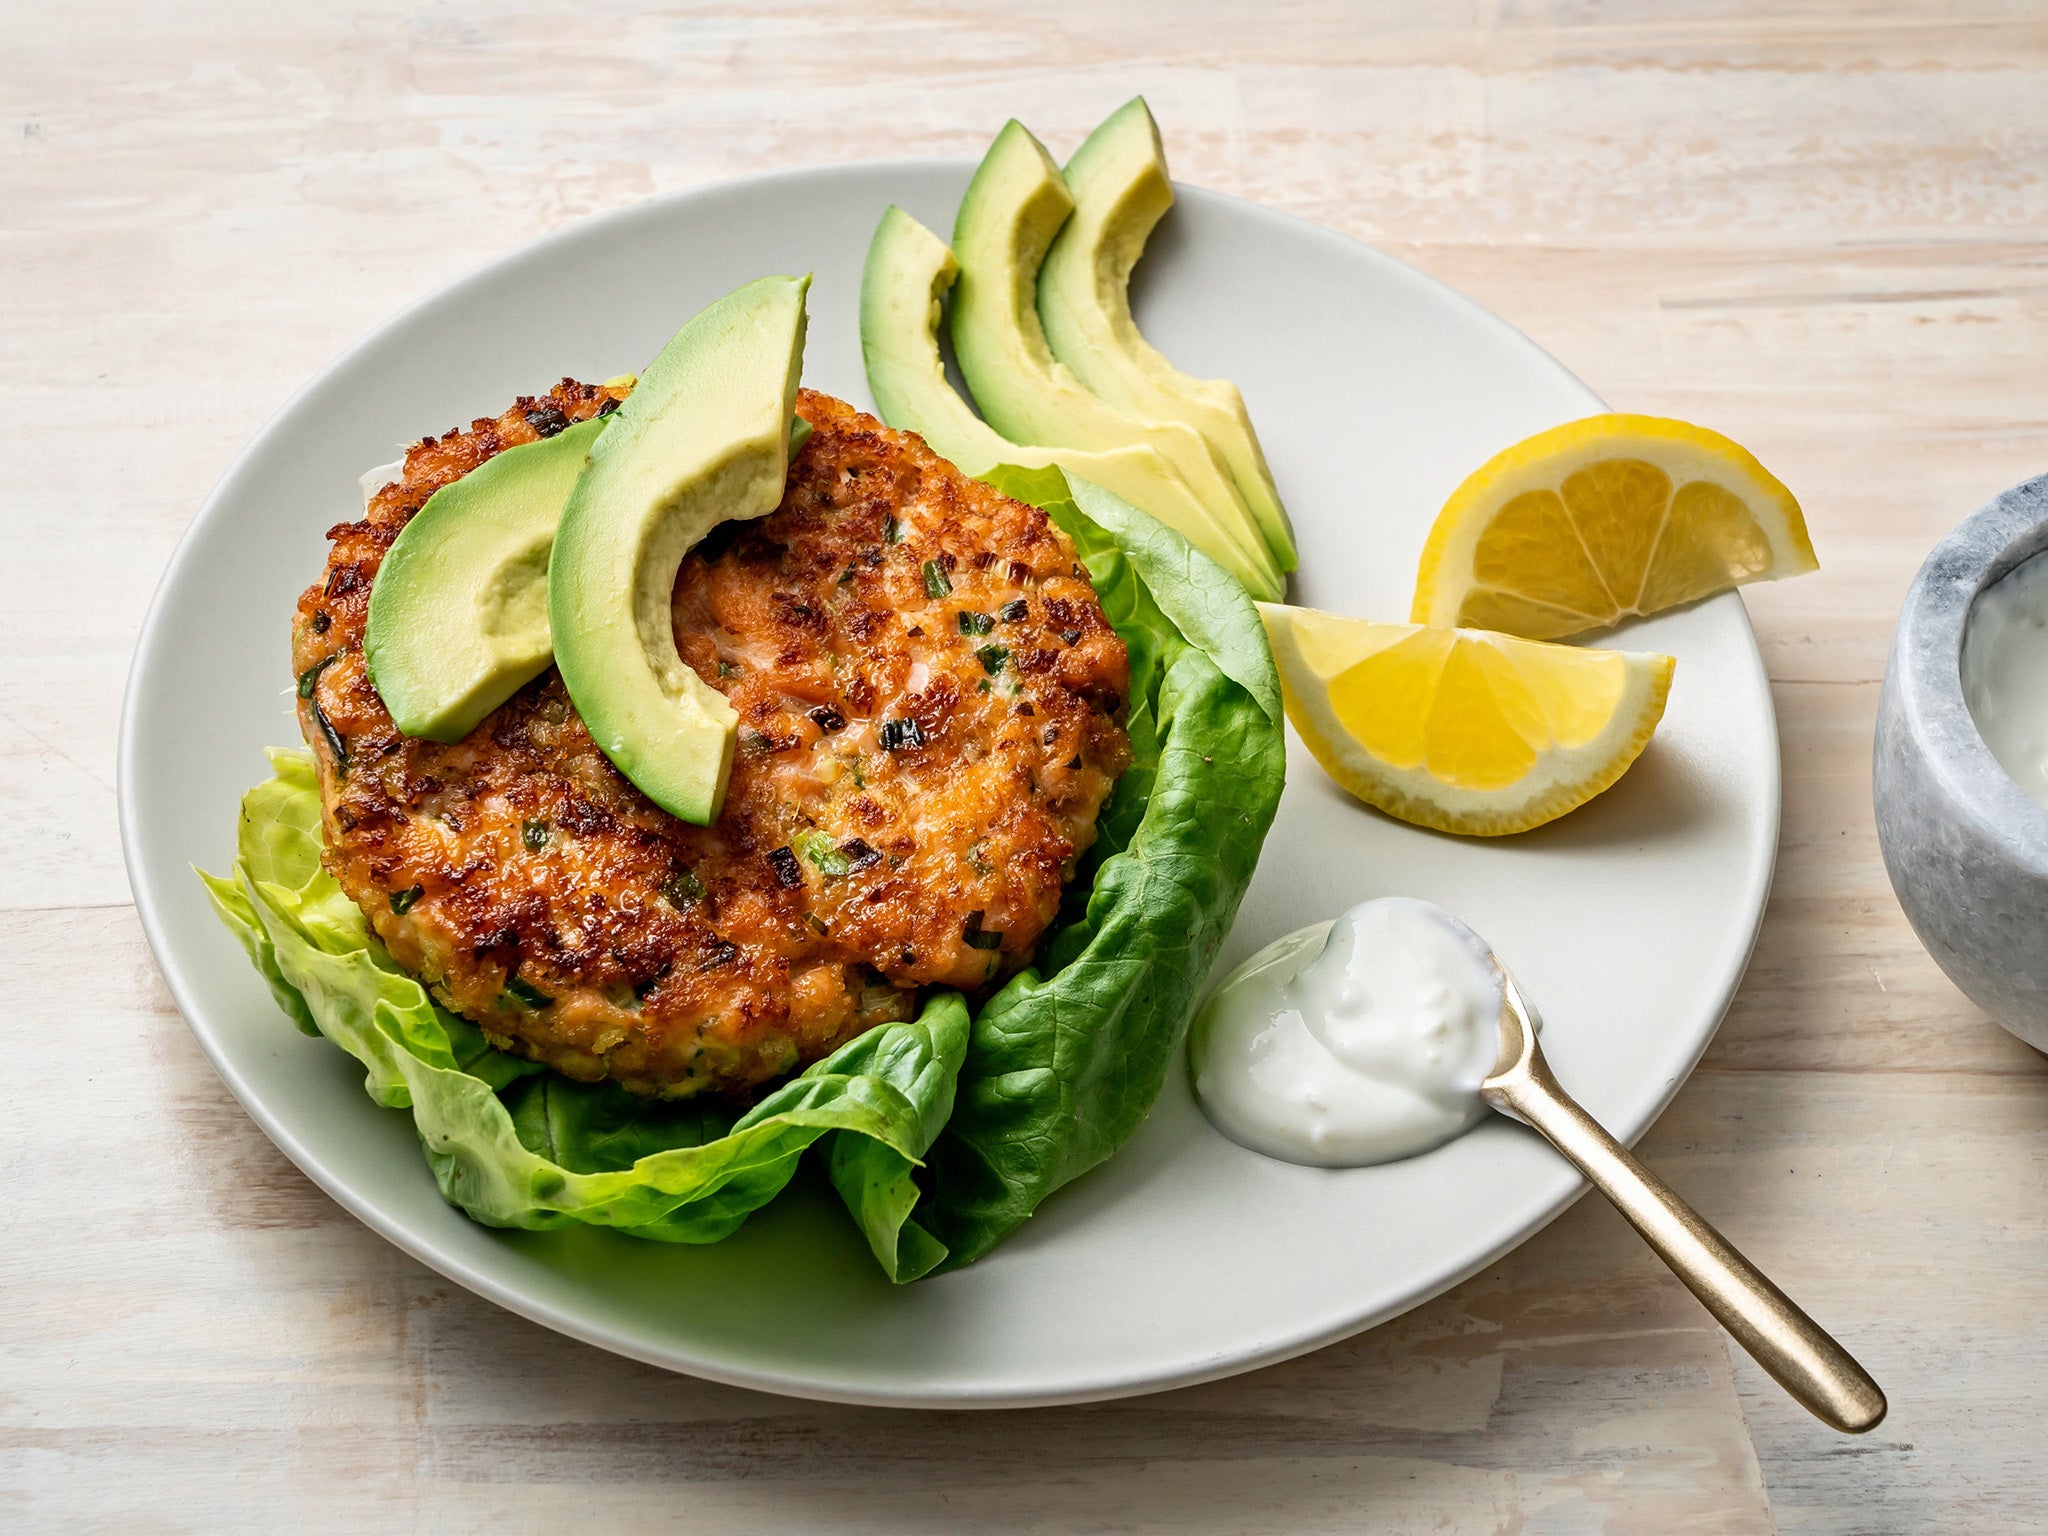 Aioli with a whisper of wasabi powder gives these fishcakes a welcome kick